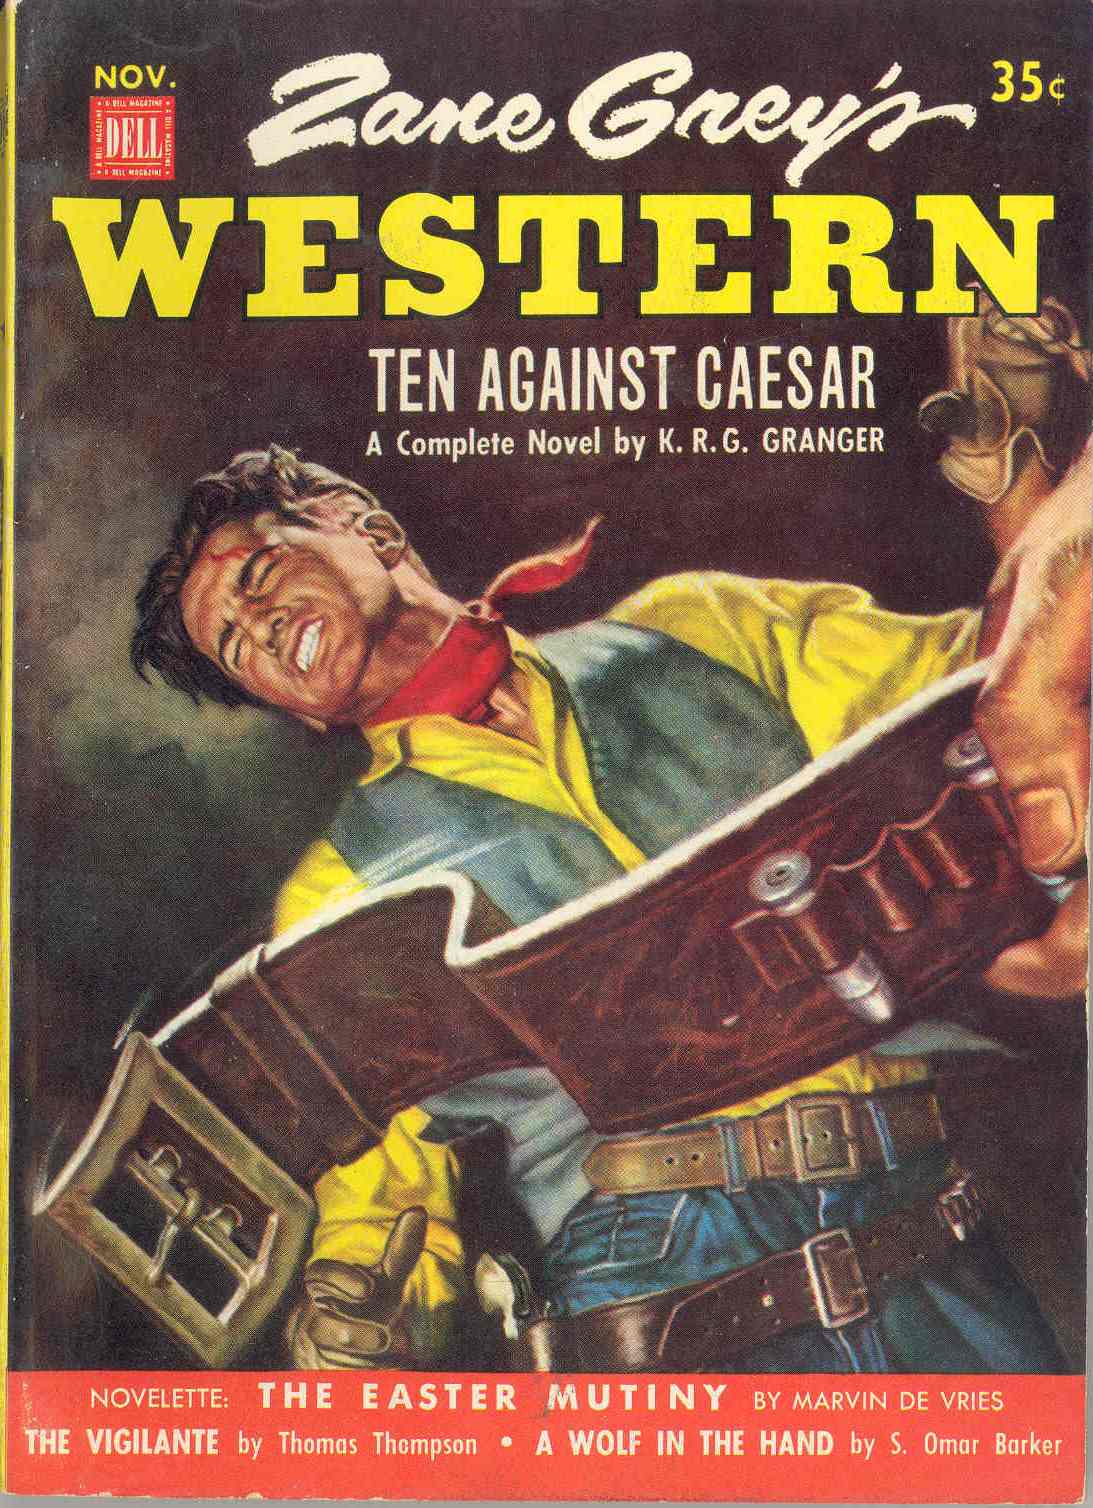 What are some popular Zane Grey Westerns?